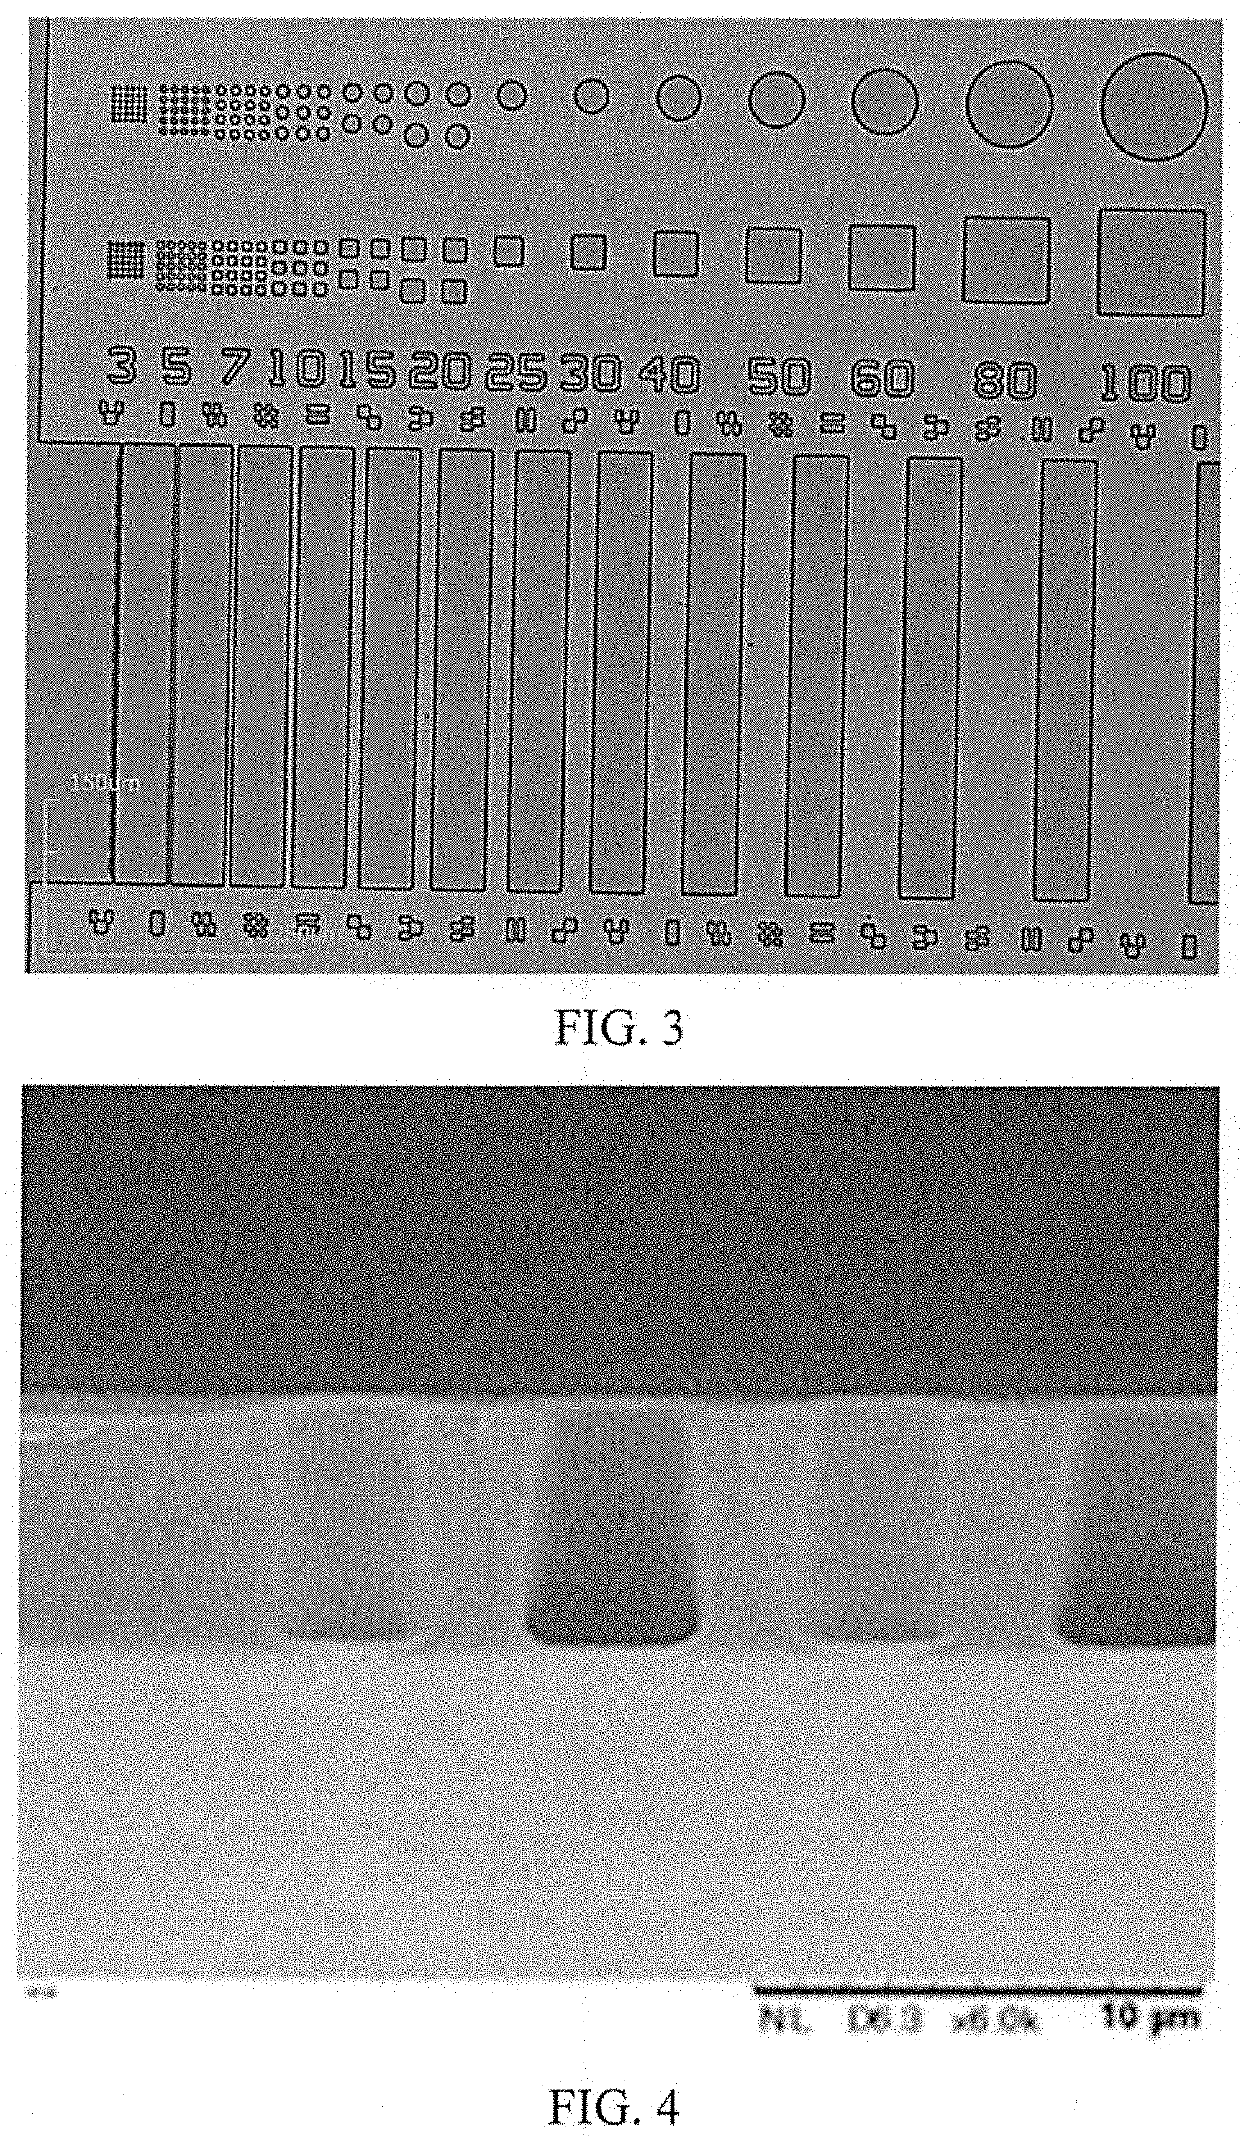 Photosensitive polyimide compositions